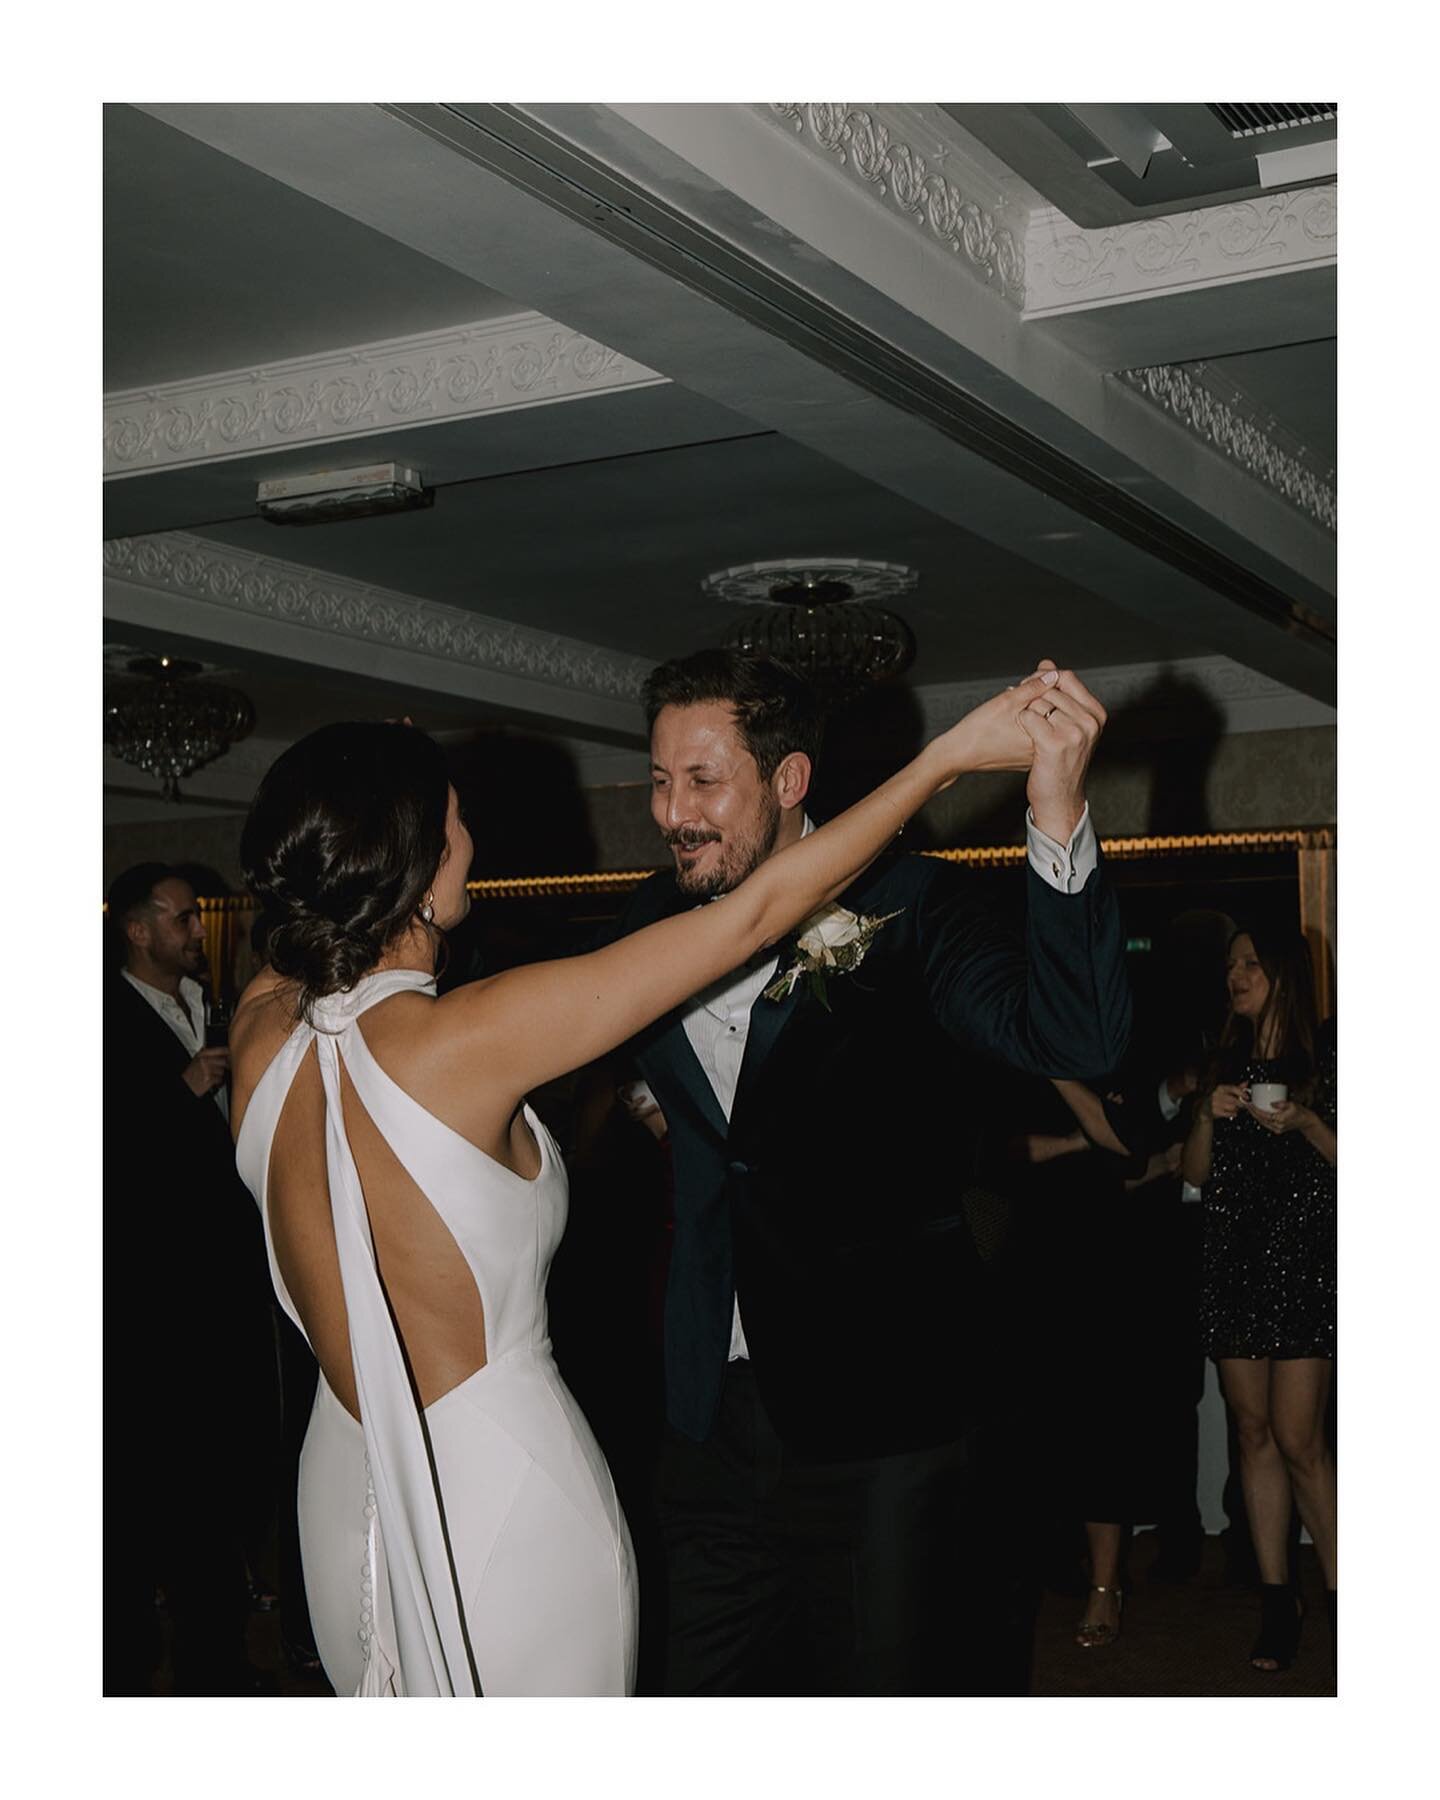 What a memorable first dance from these two.
.
.
.
.
#fineartwedding #fineartweddingphotographer #fineartweddingphotography #femaleweddingphotographer #destinationweddingphotographer #editorialweddingphotographer #weddingphotography #weddingphotograp